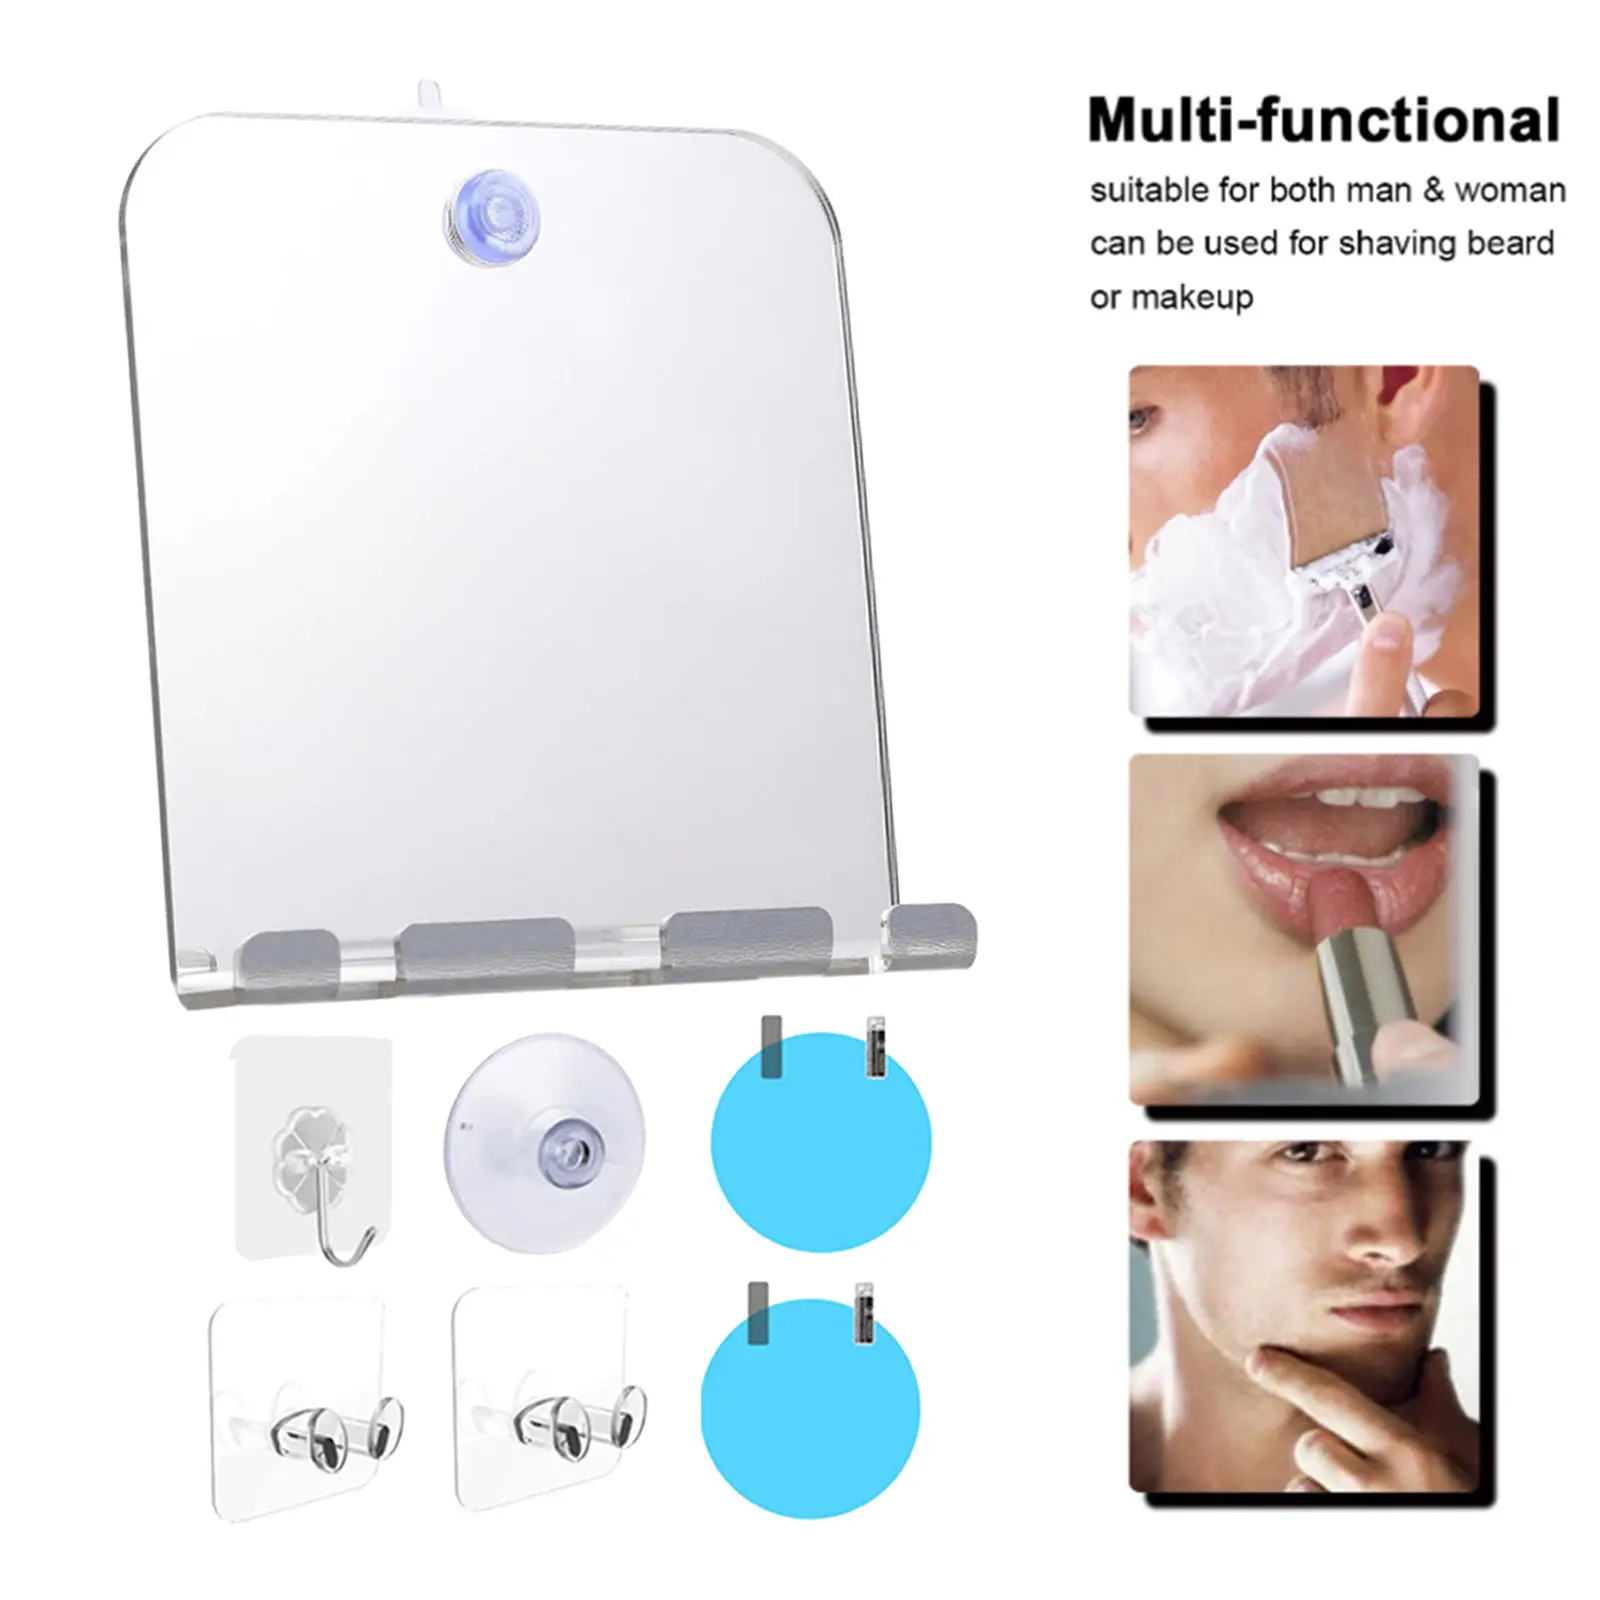 Portable Fogless Shower Shaving Makeup Mirror, with Suction Cup Wall Hanging, Travel Bathroom Anti Fog Mirror